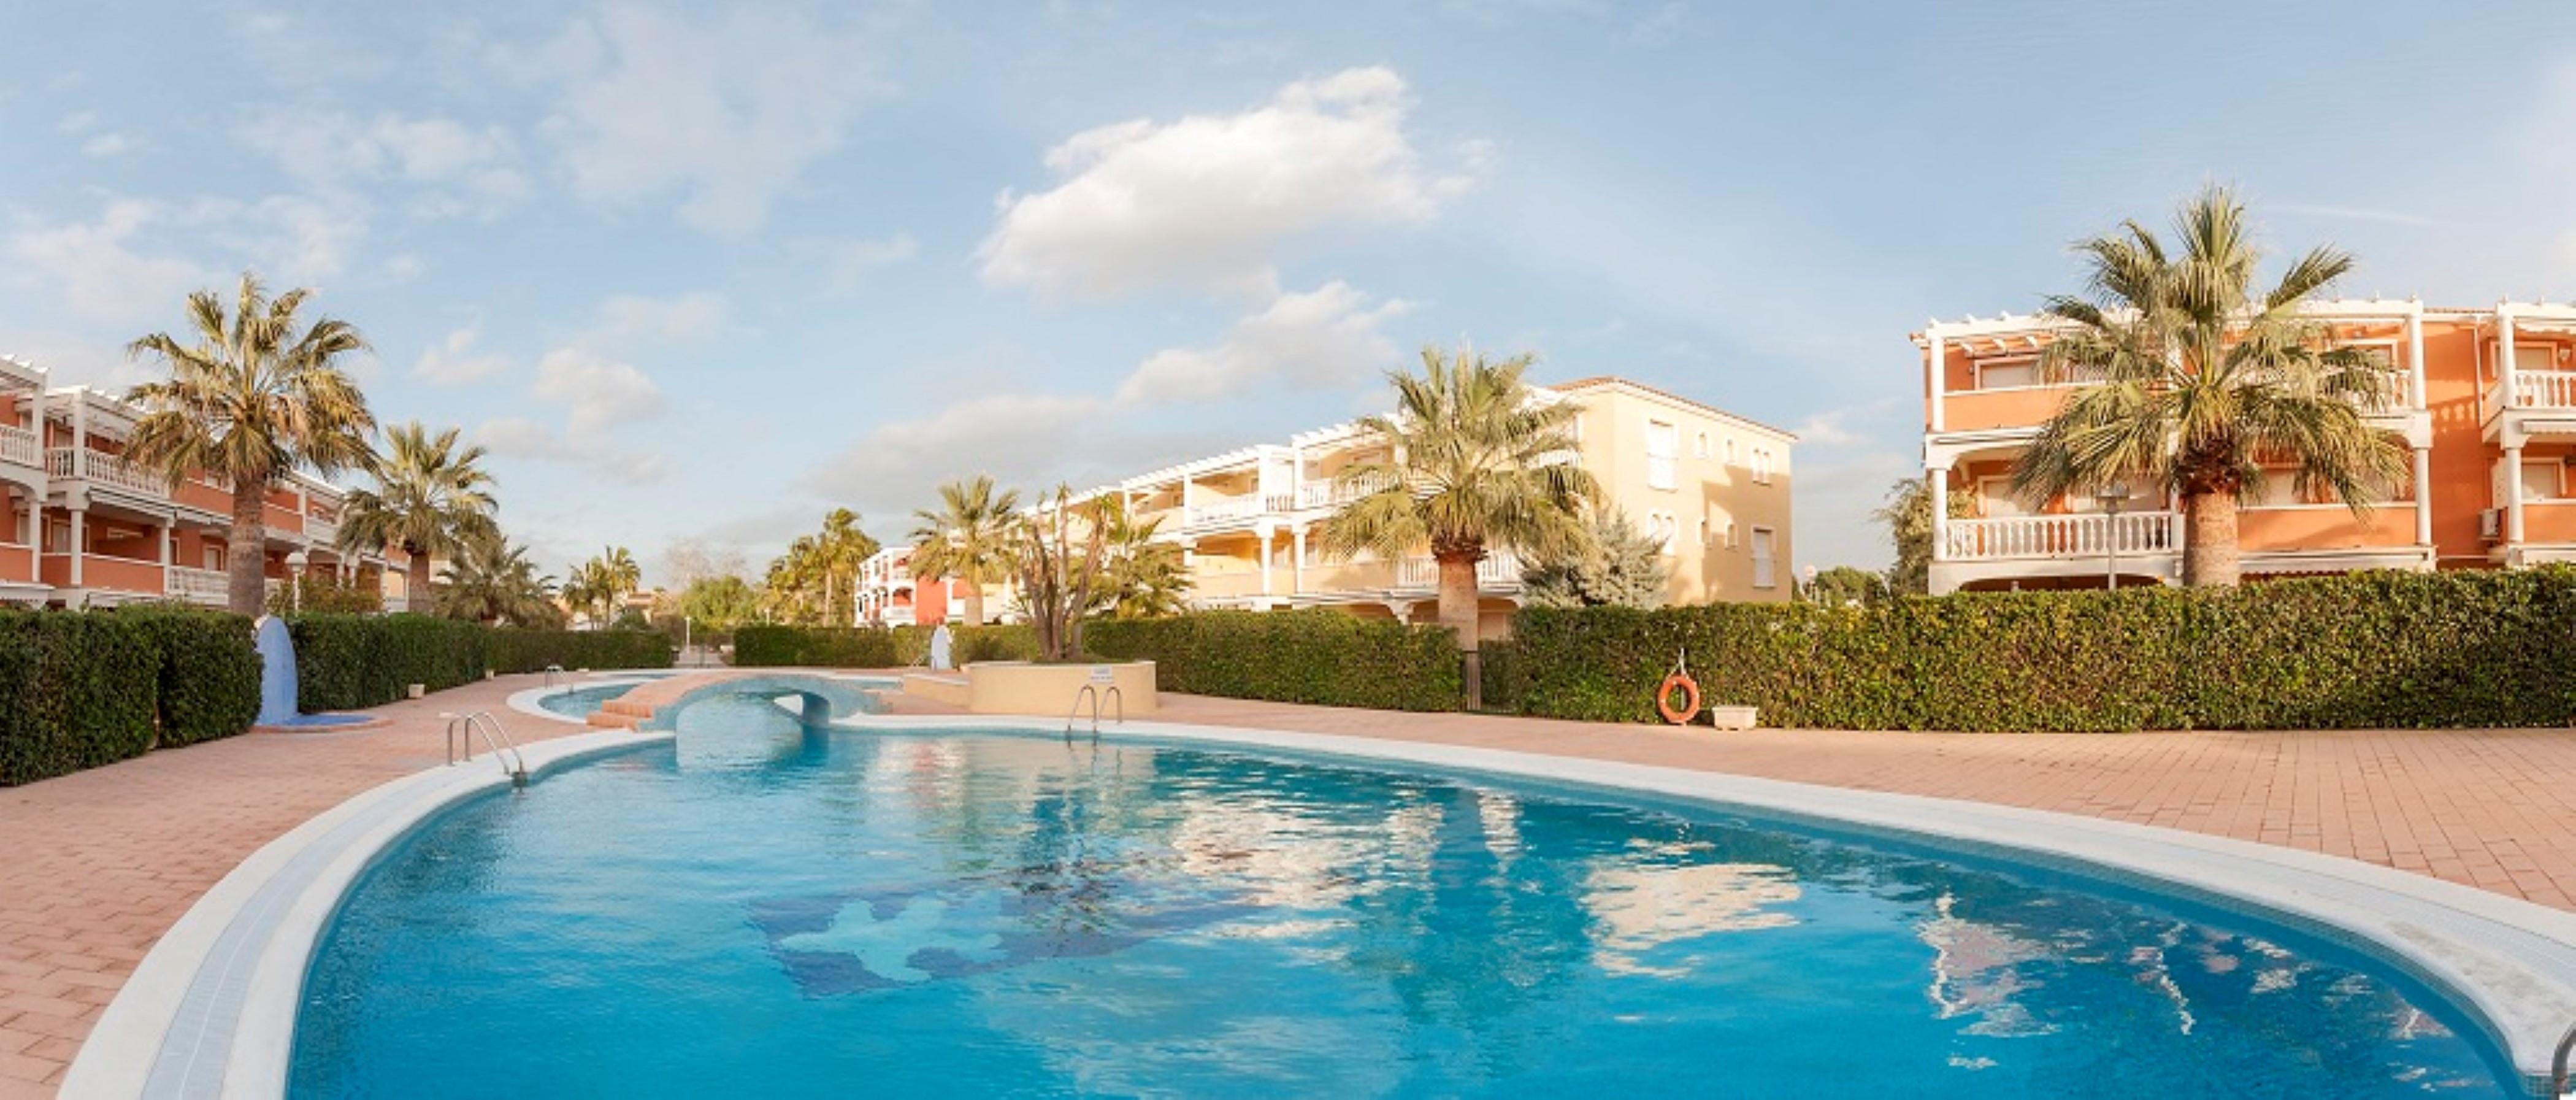 Property Image 1 - GUAYABA - Apartment with shared pool in Denia. Free WiFi